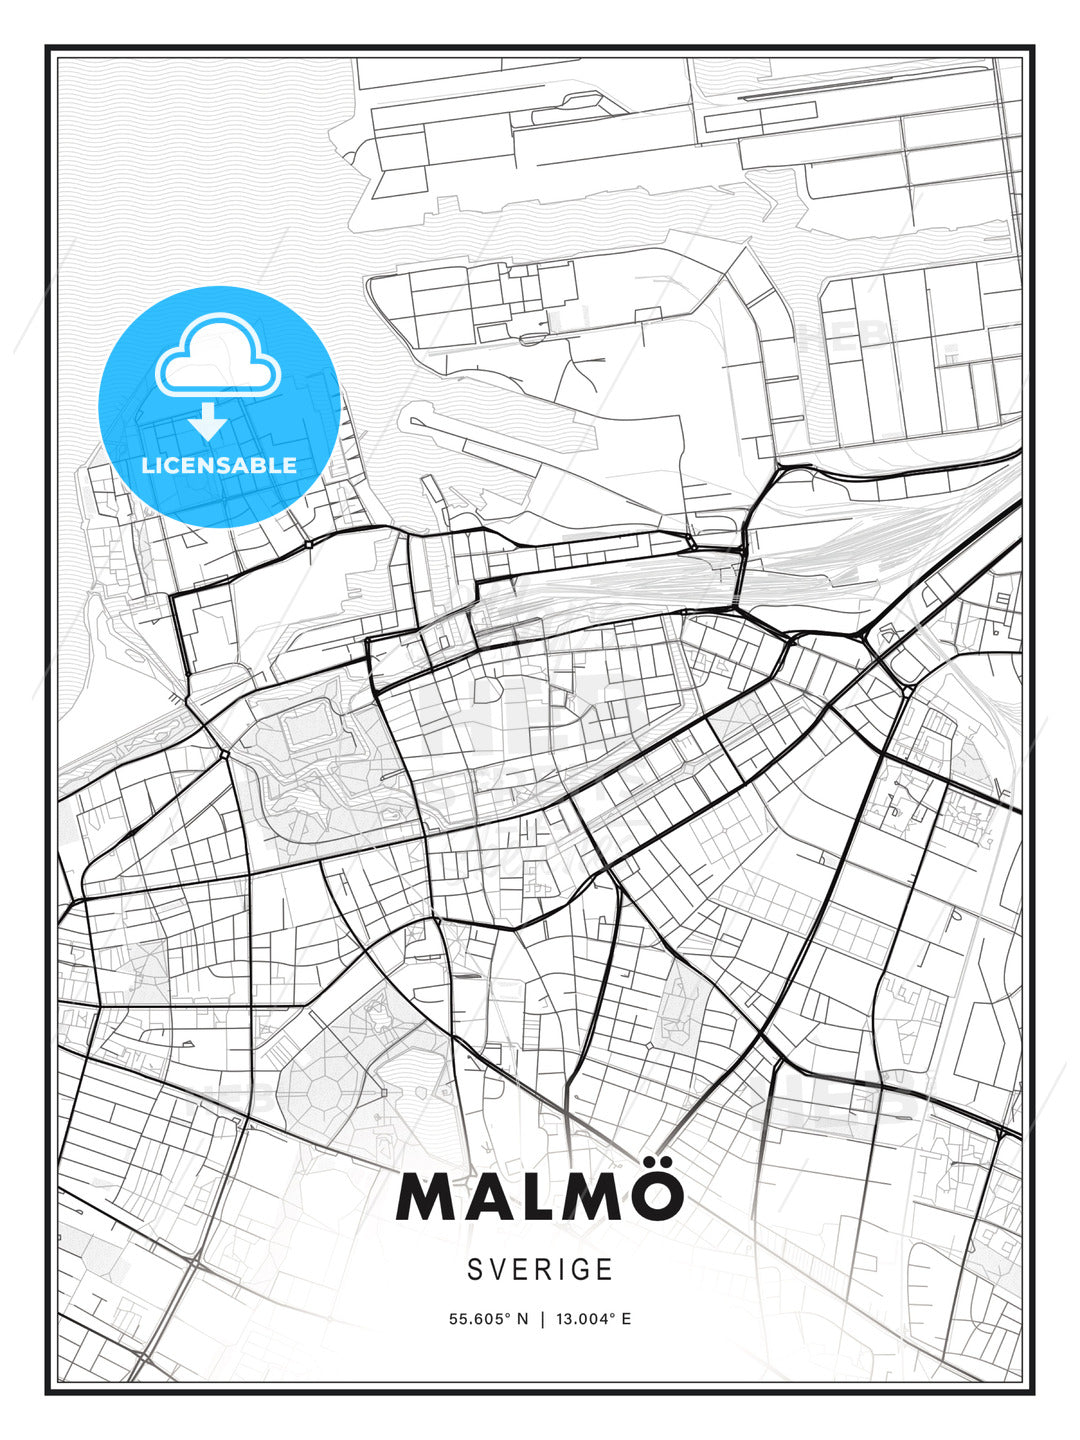 Malmö, Sweden, Modern Print Template in Various Formats - HEBSTREITS Sketches